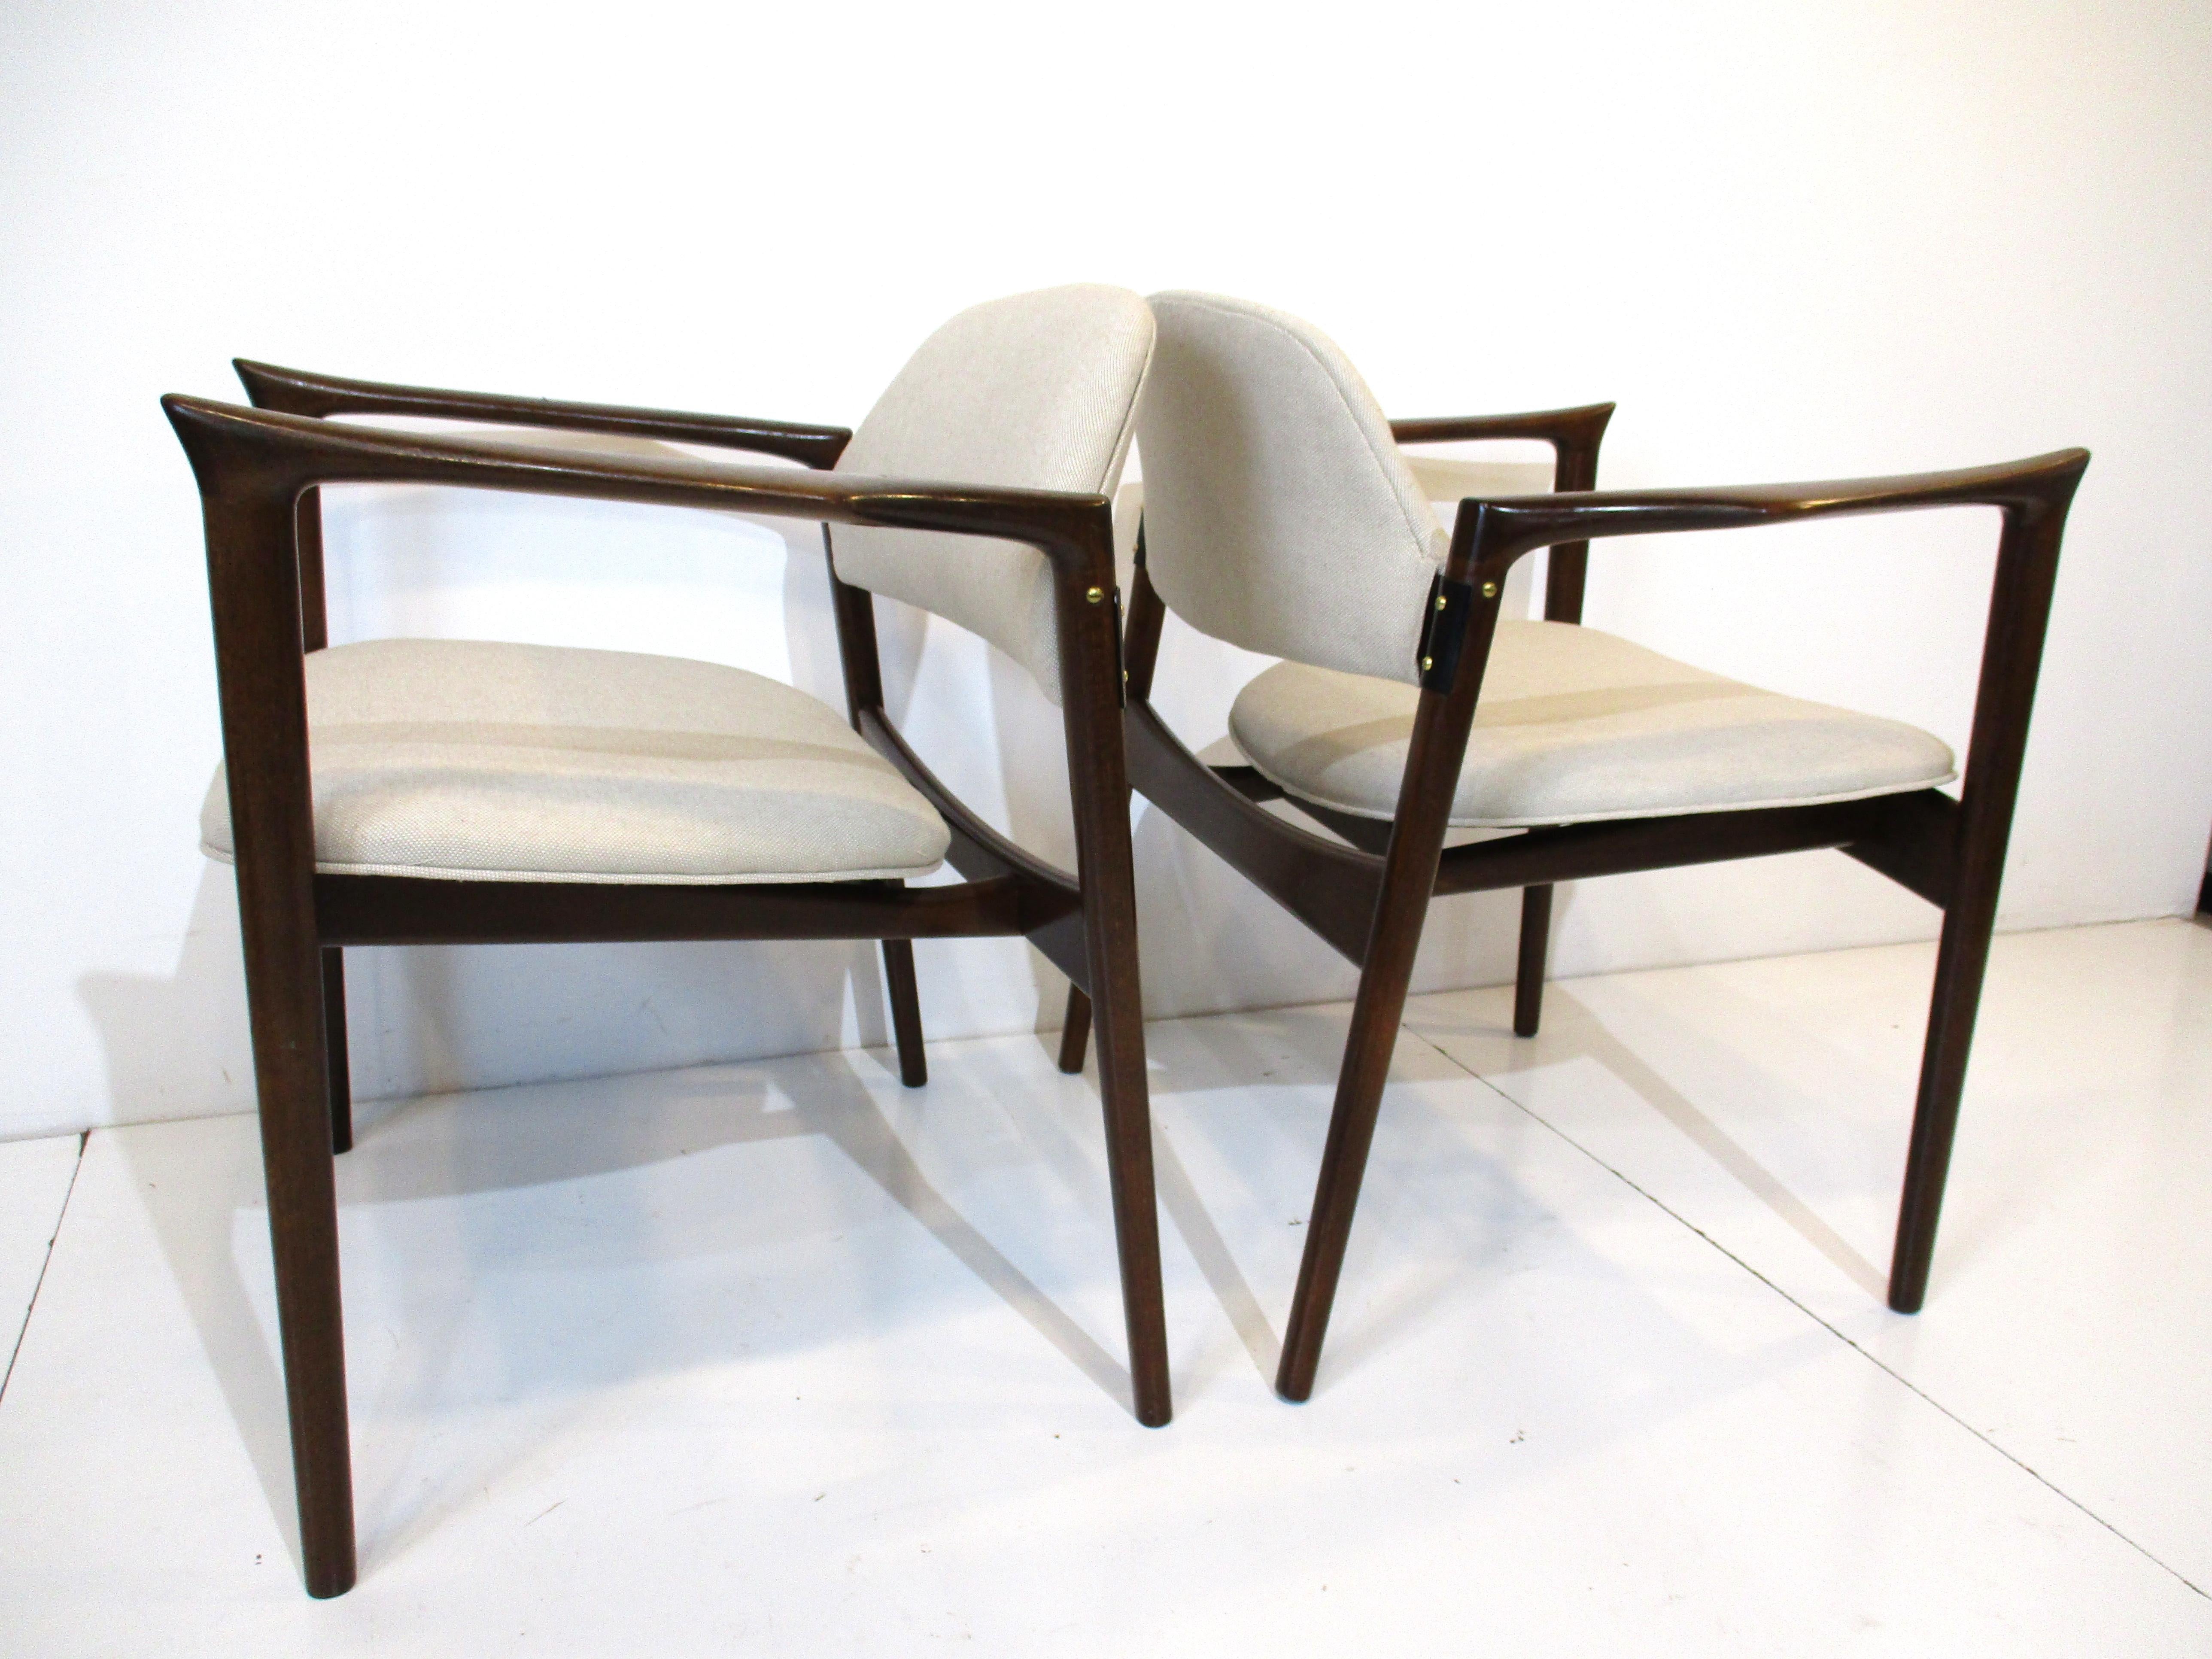 Rare Danish Writing Armchairs by IB Kofod Larsen for Selig In Good Condition For Sale In Cincinnati, OH